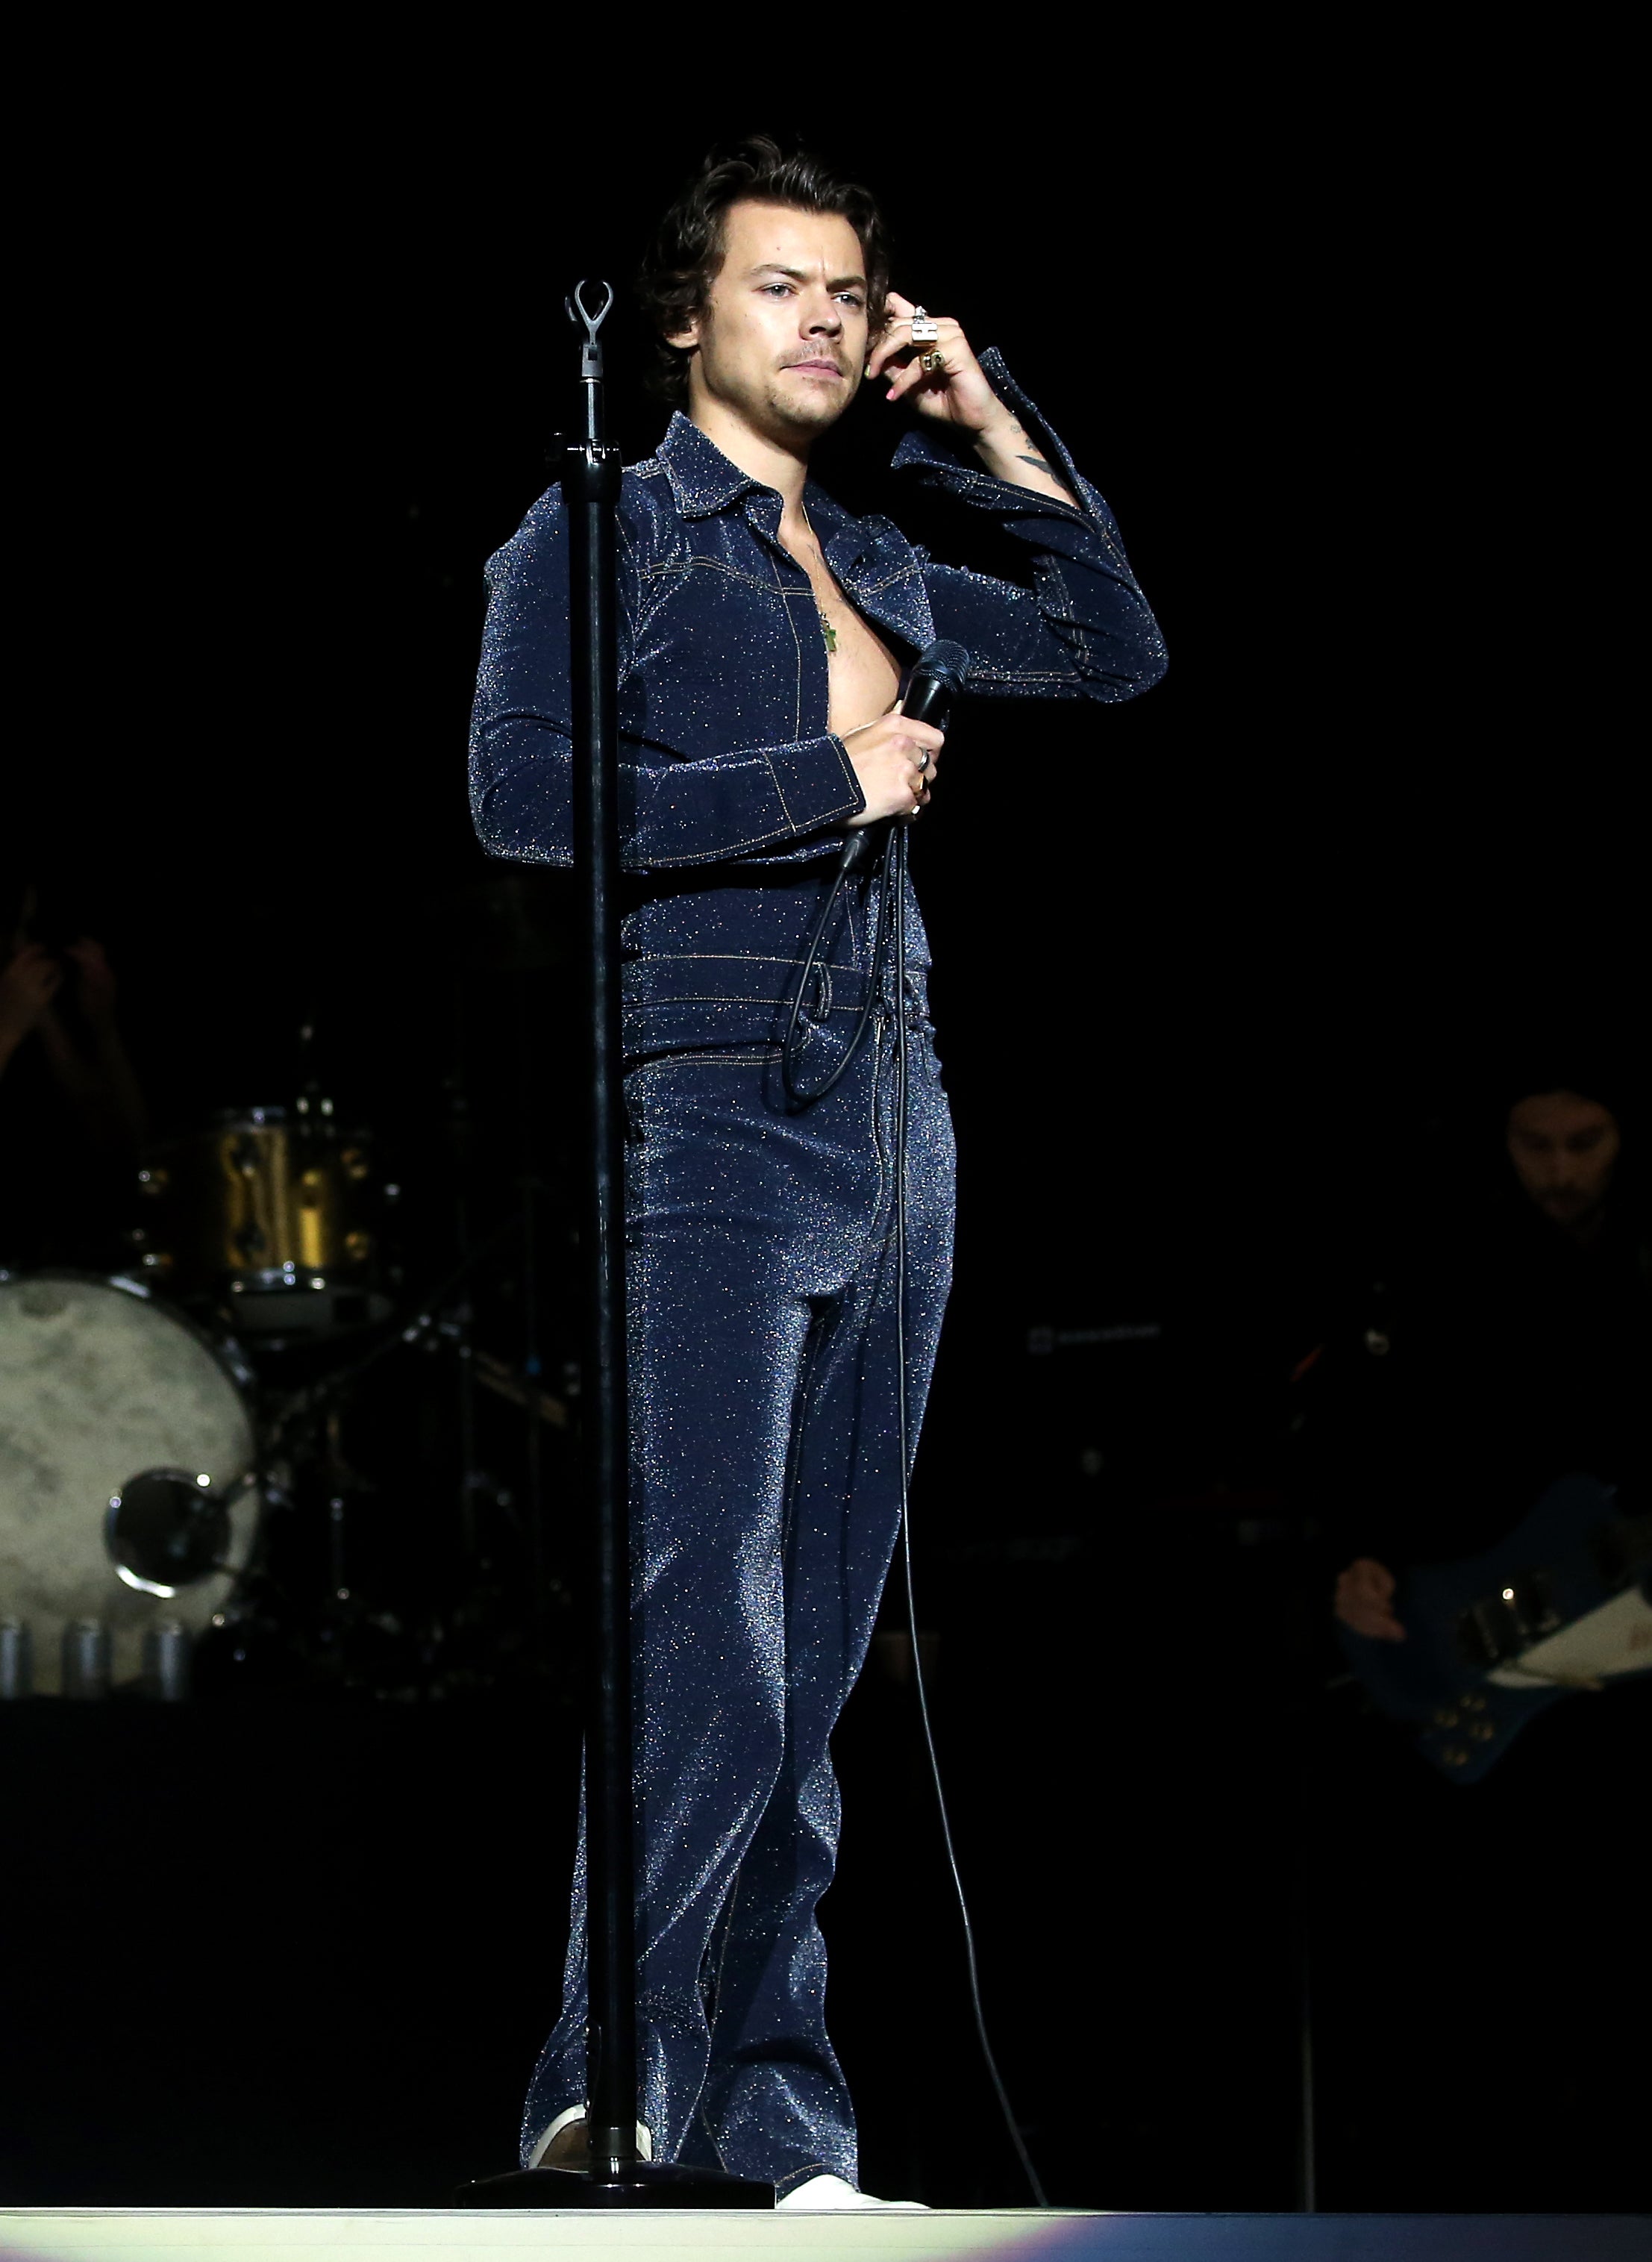 Harry Styles performing in a blue glittery jumpsuit in 2019 (Isabel Infantes/PA)